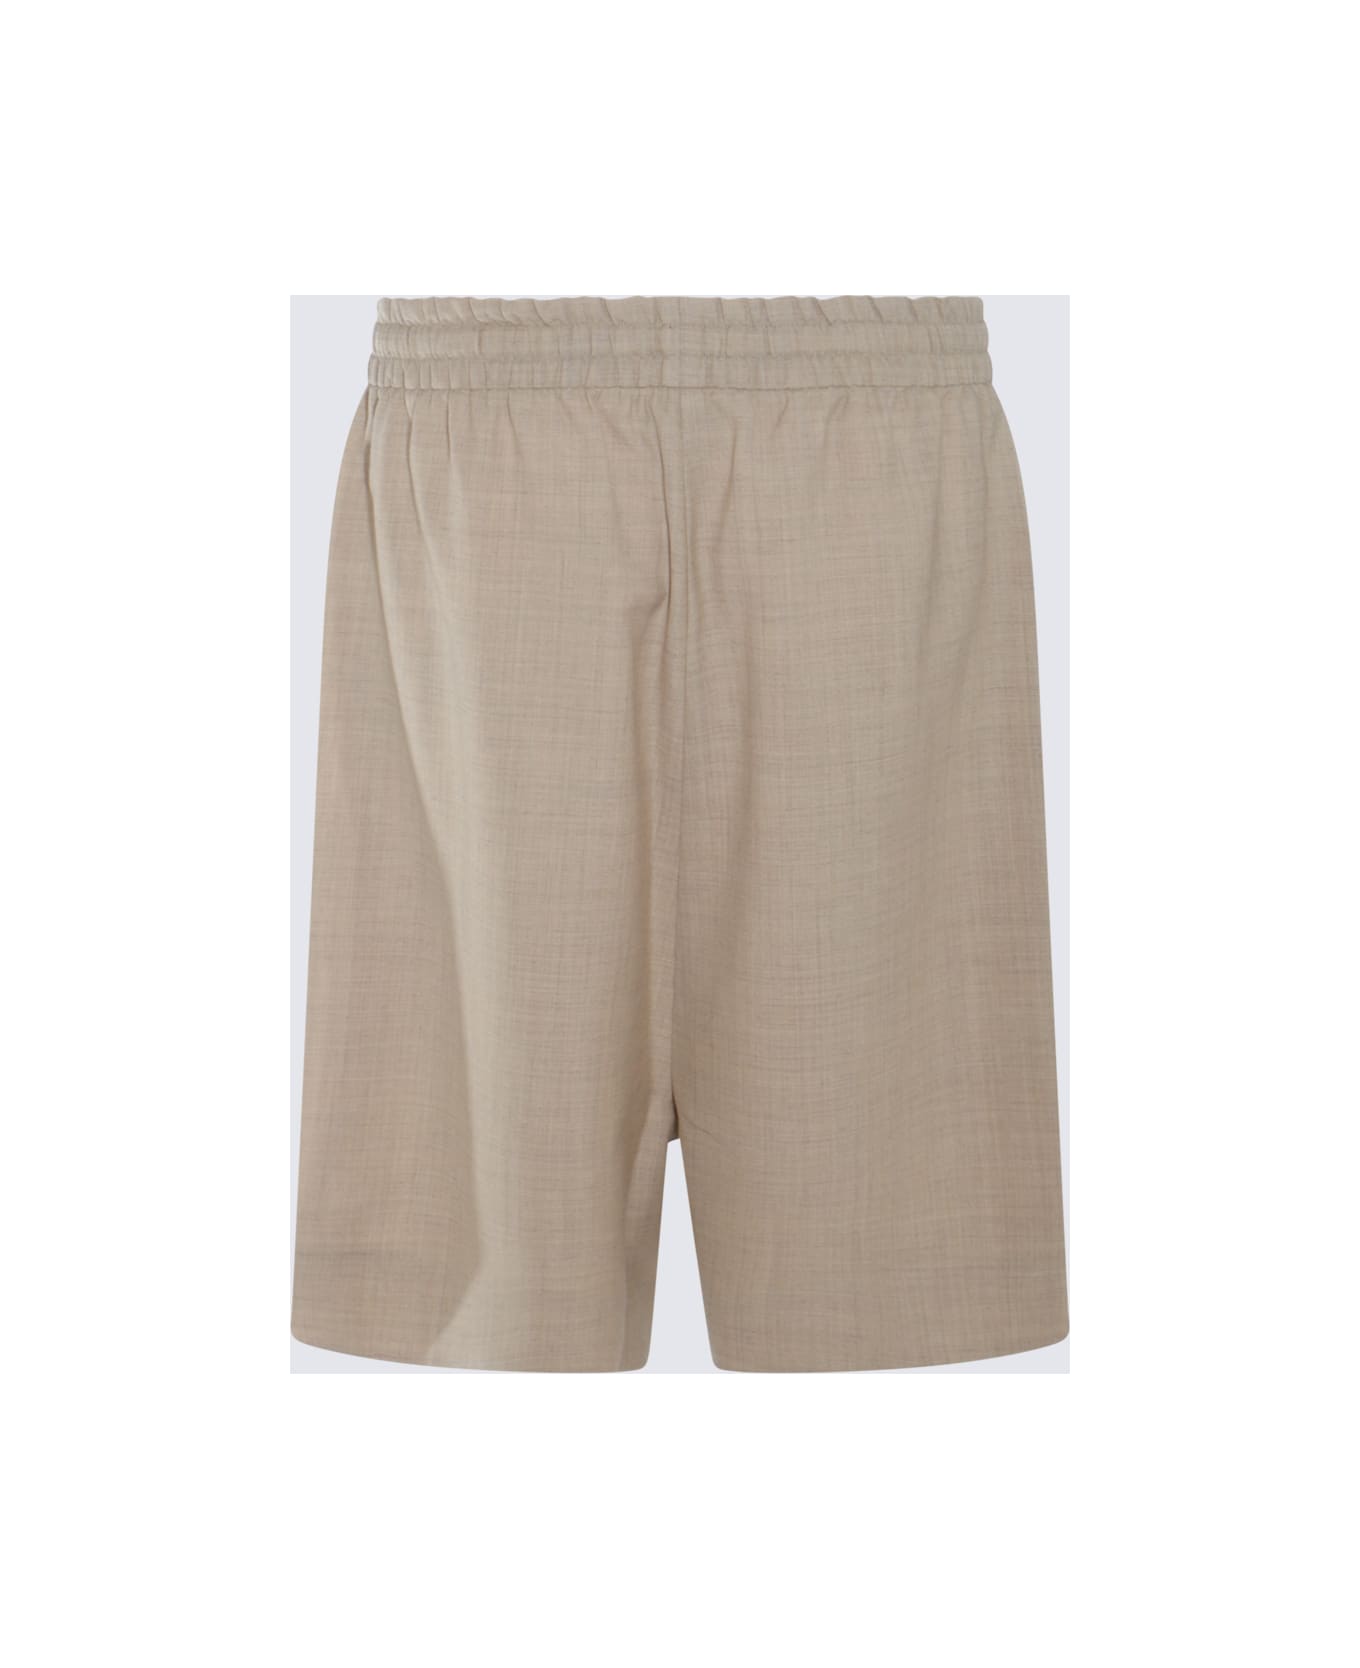 Fear of God Tan Cotton Shorts - Brown